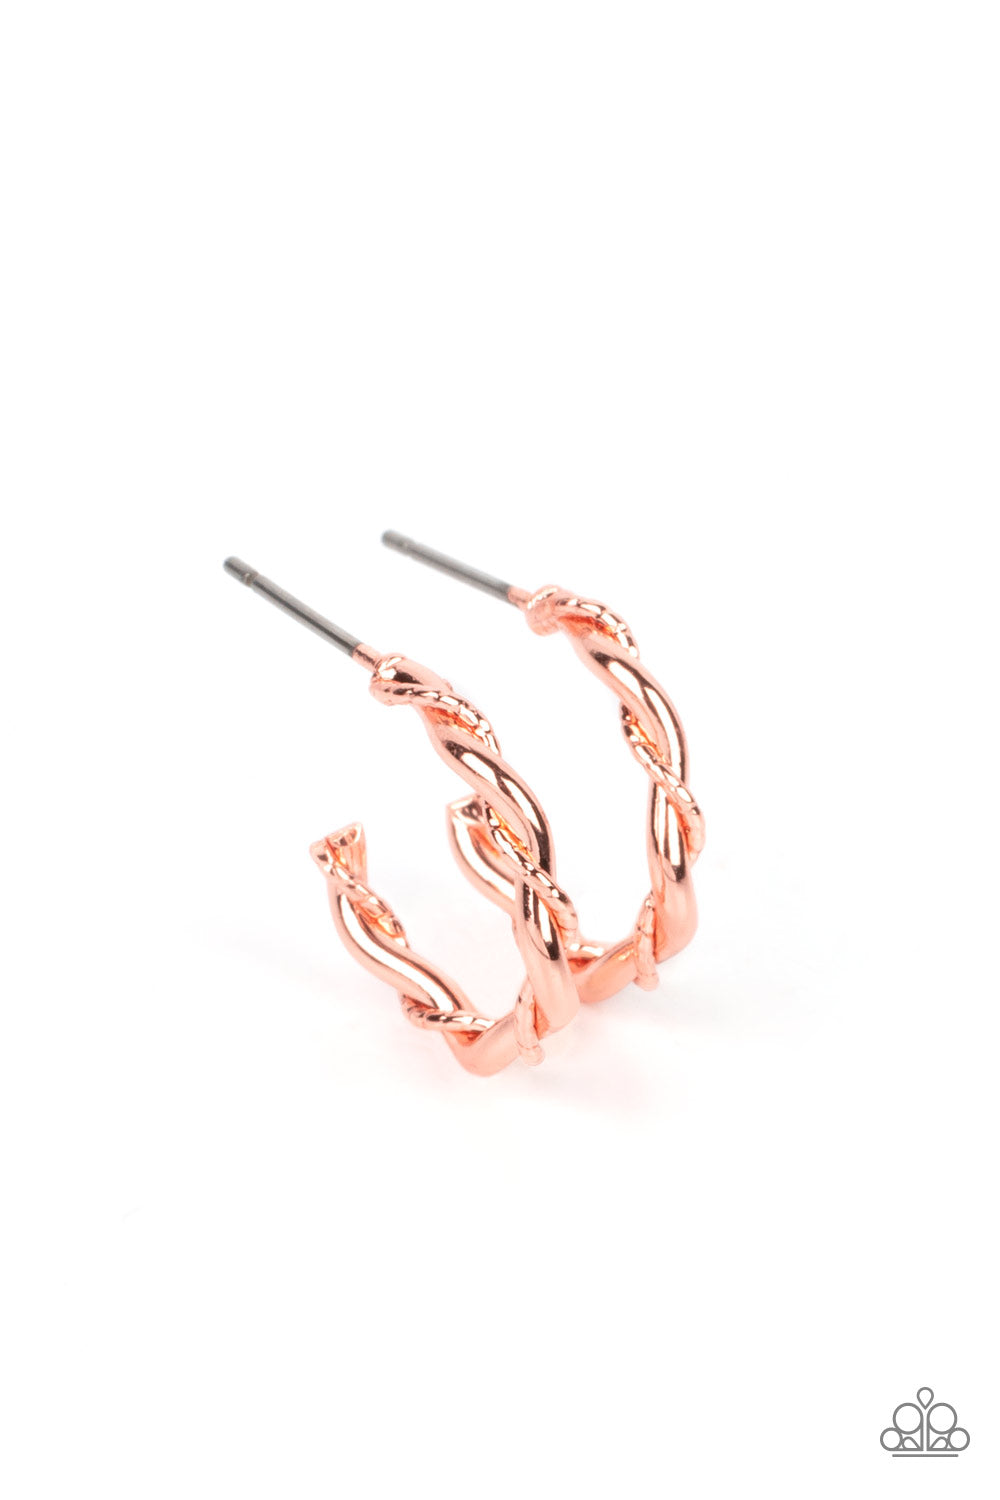 Irresistibly Intertwined - Blush Copper